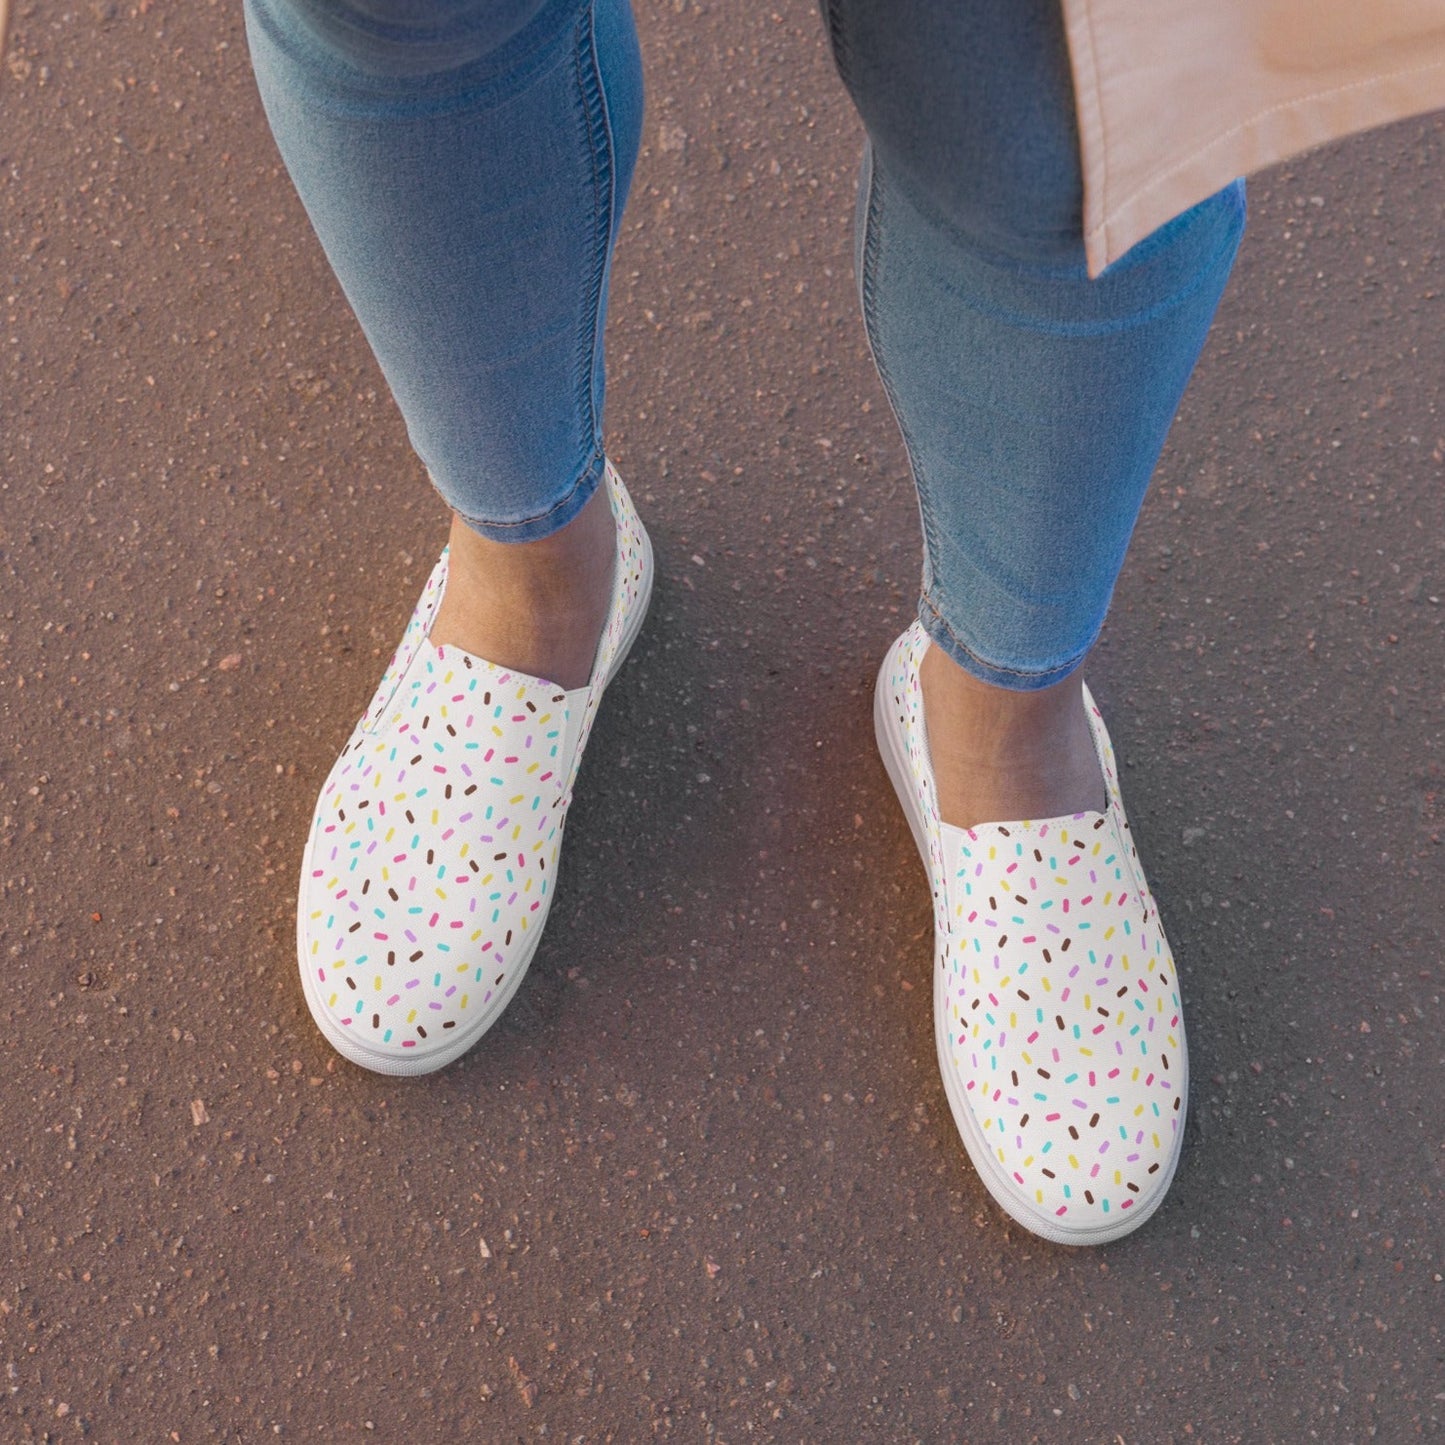 Sprinkled with Love - Women’s Slip-on Canvas Shoes in White